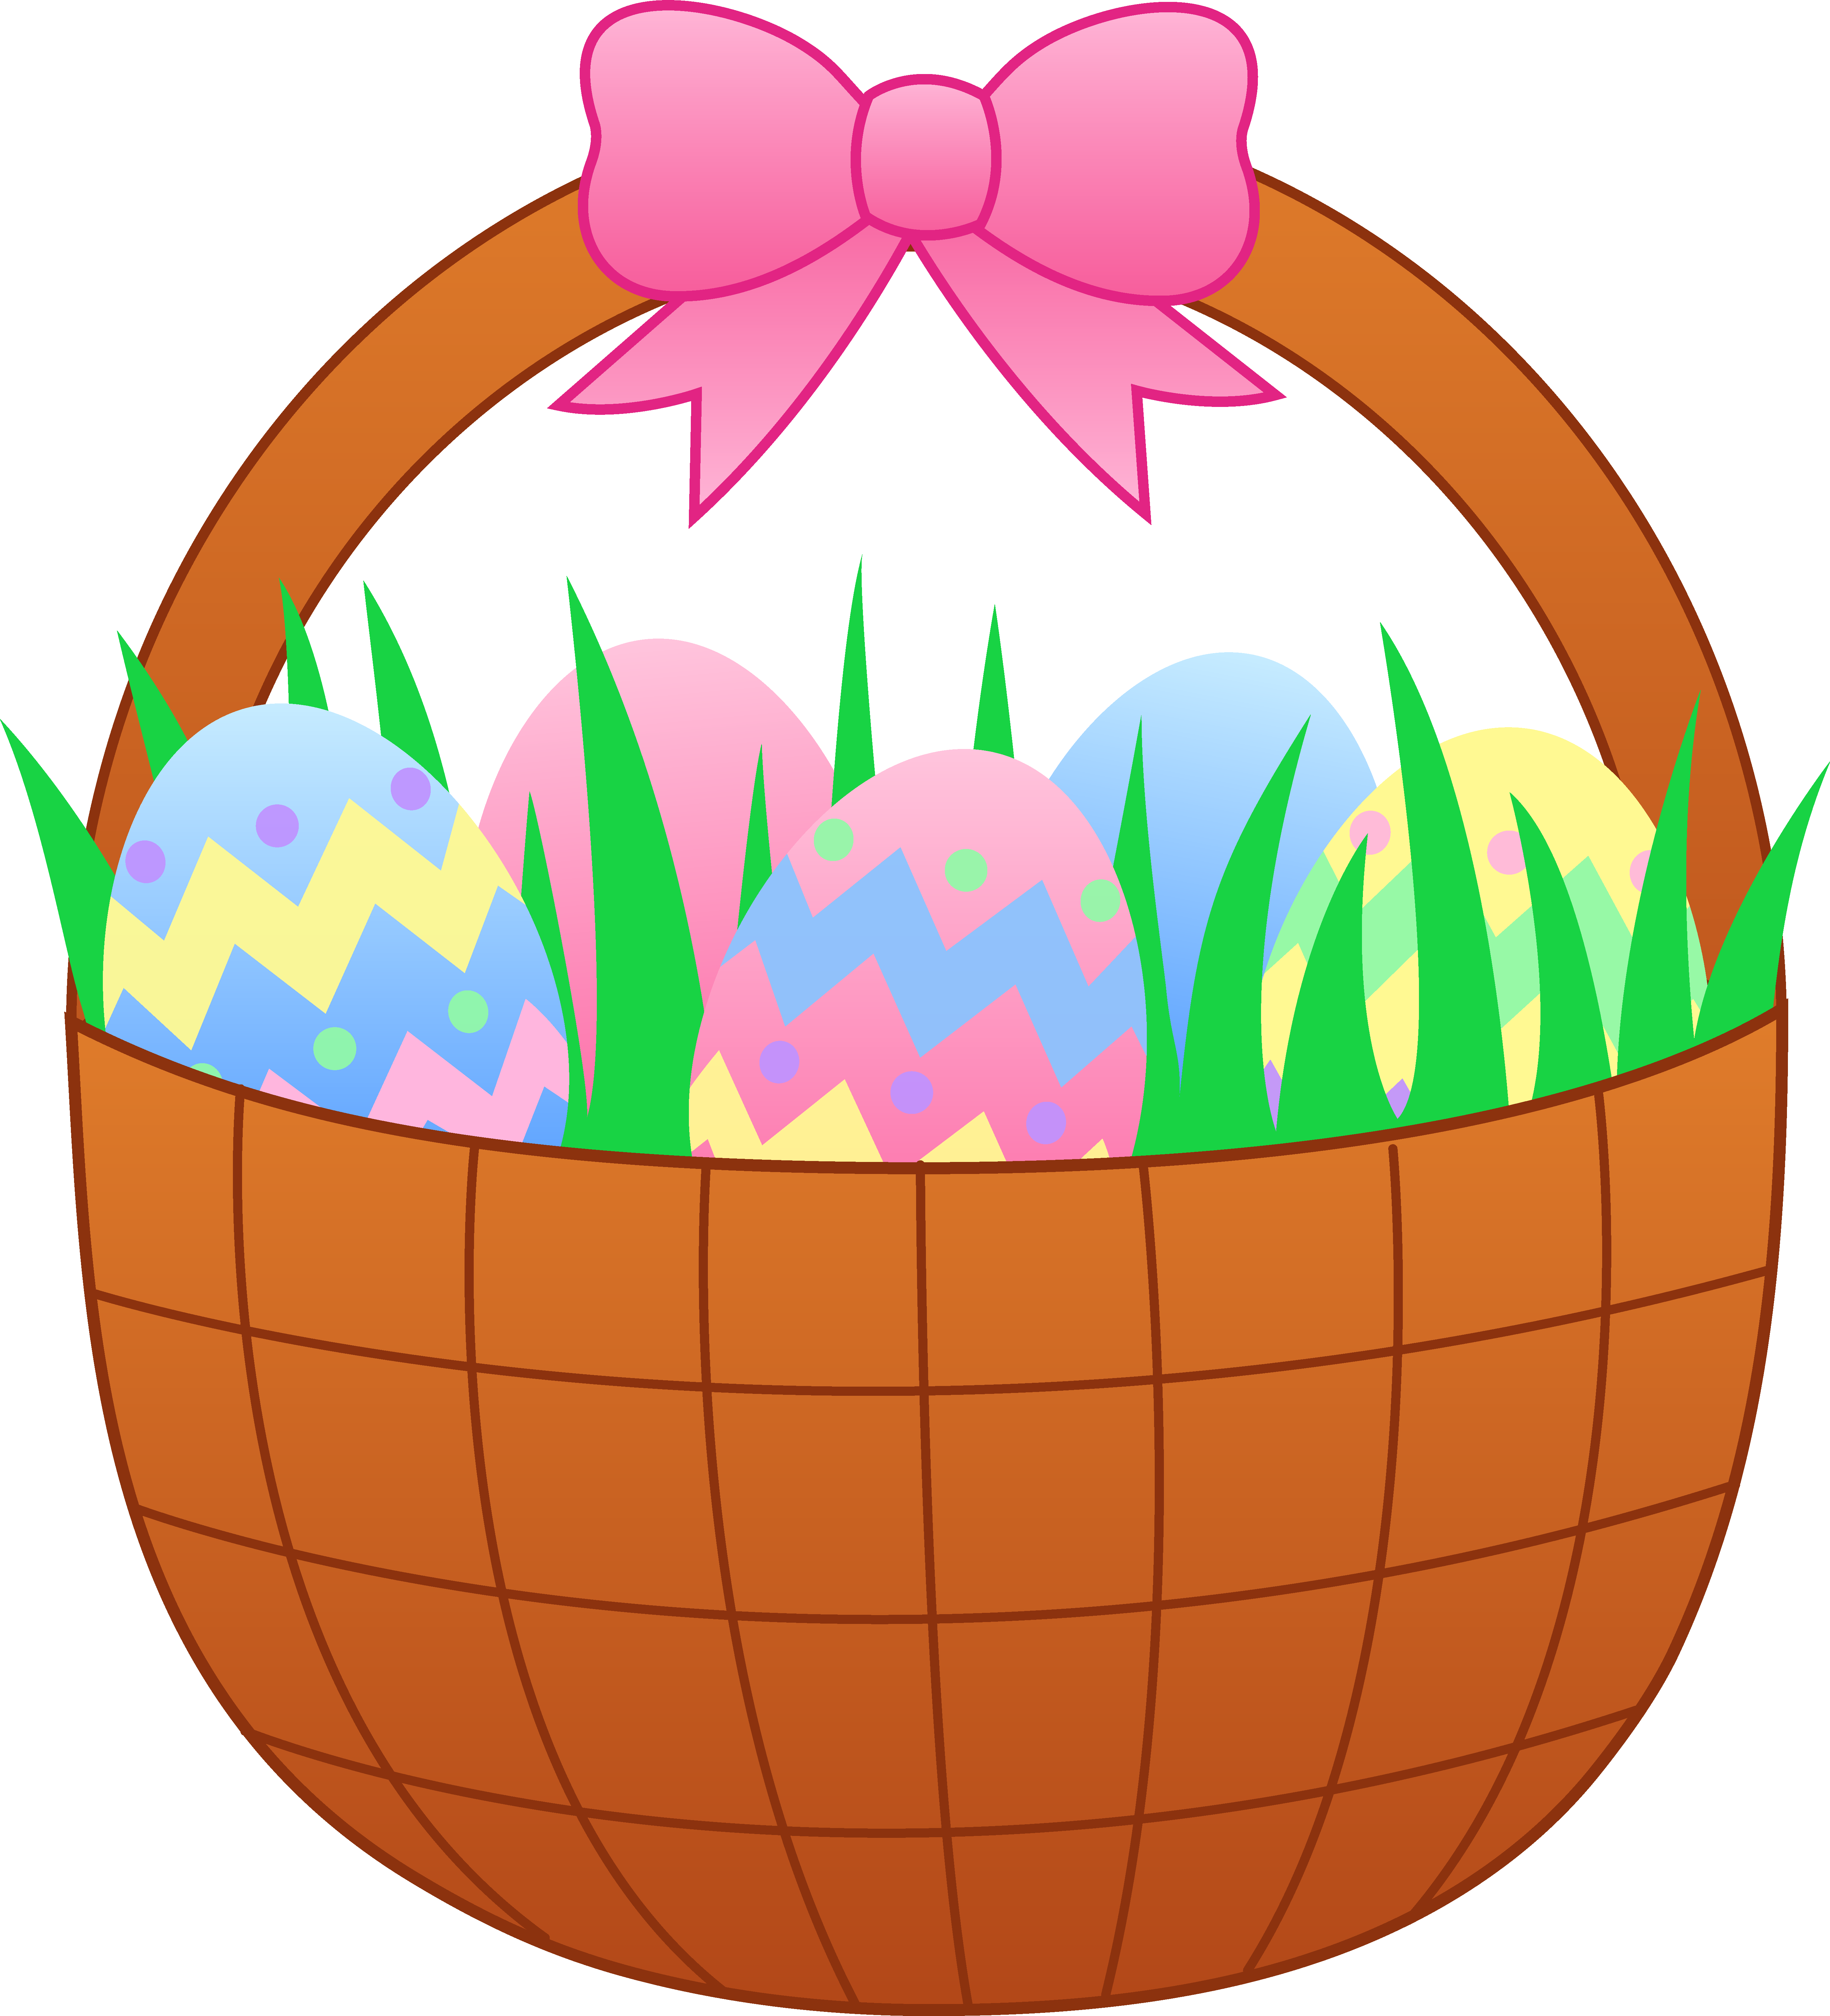 free vector clipart easter egg - photo #50